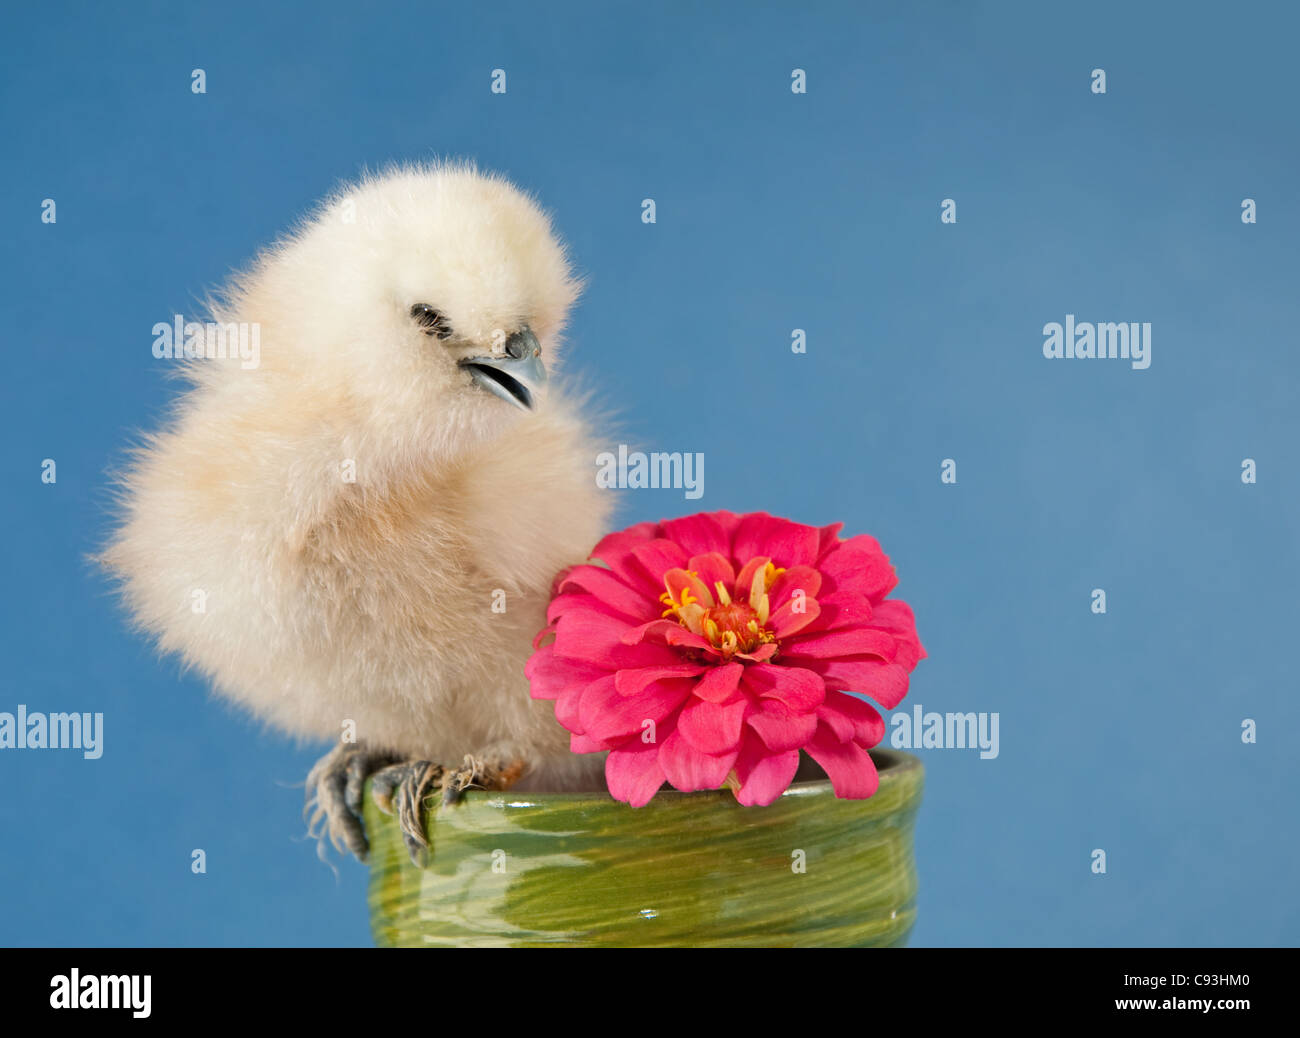 Fluffy Easter chick sitting in a small flower pot with a bright pink Zinnia flower against blue background Stock Photo